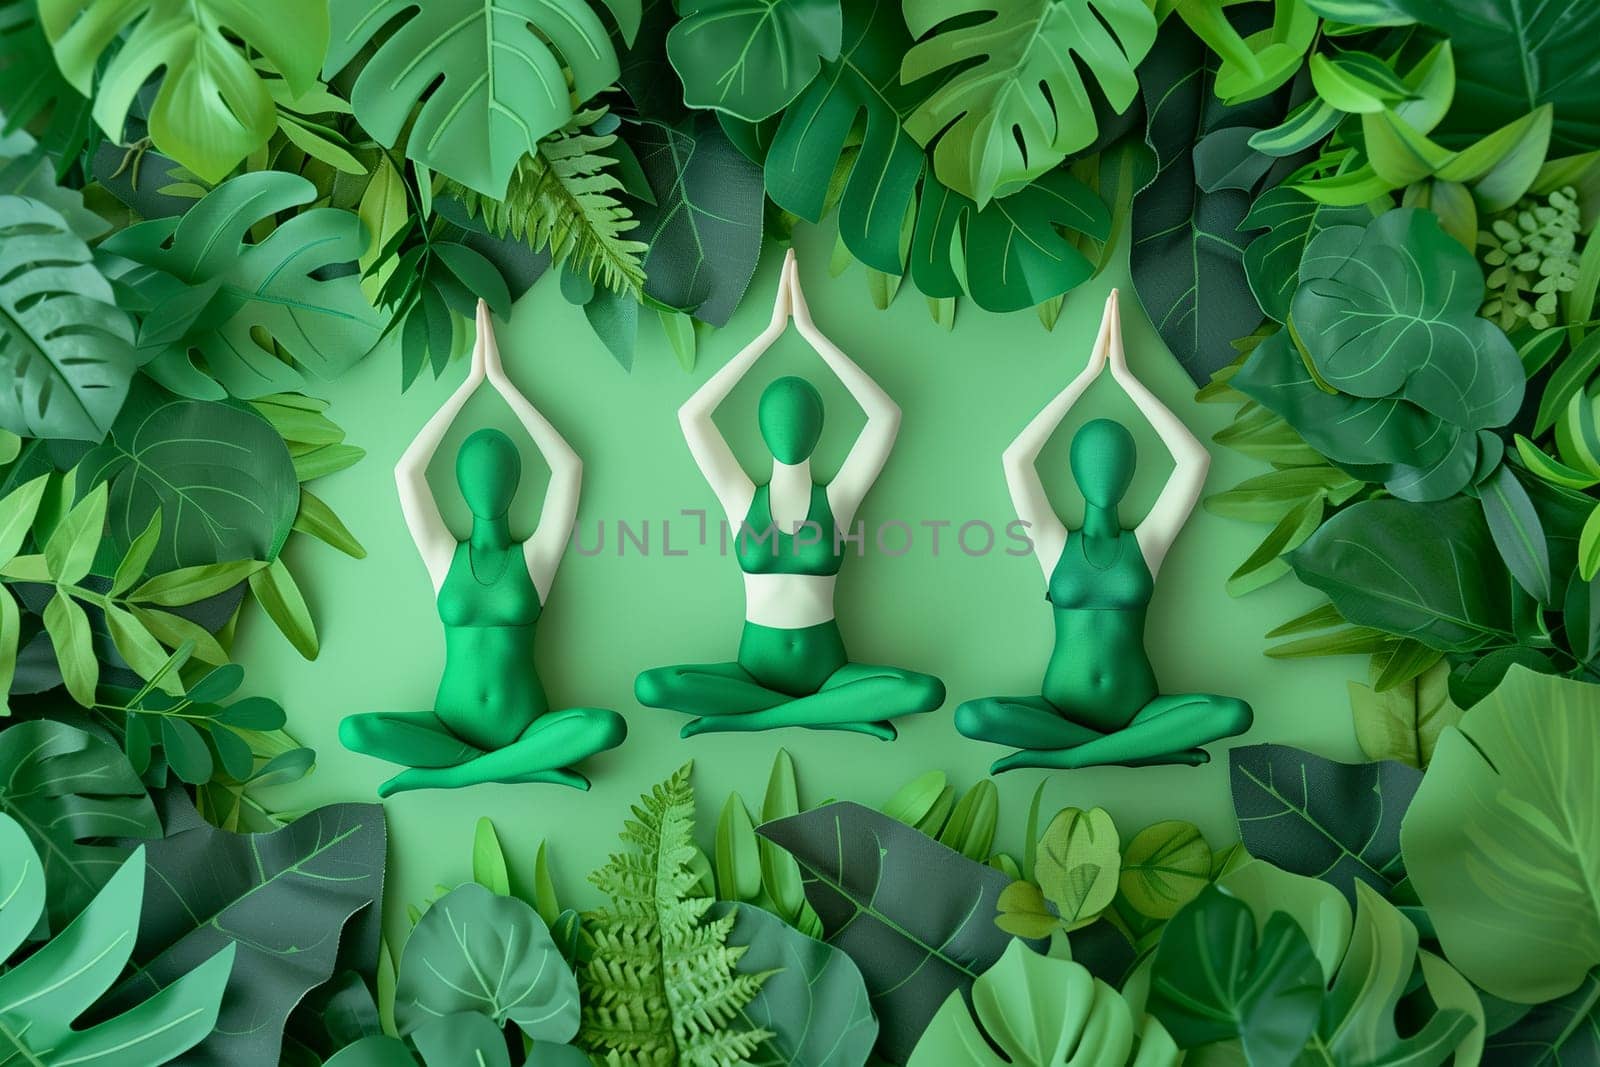 Three green dolls are positioned in various yoga poses amidst a backdrop of green leaves.